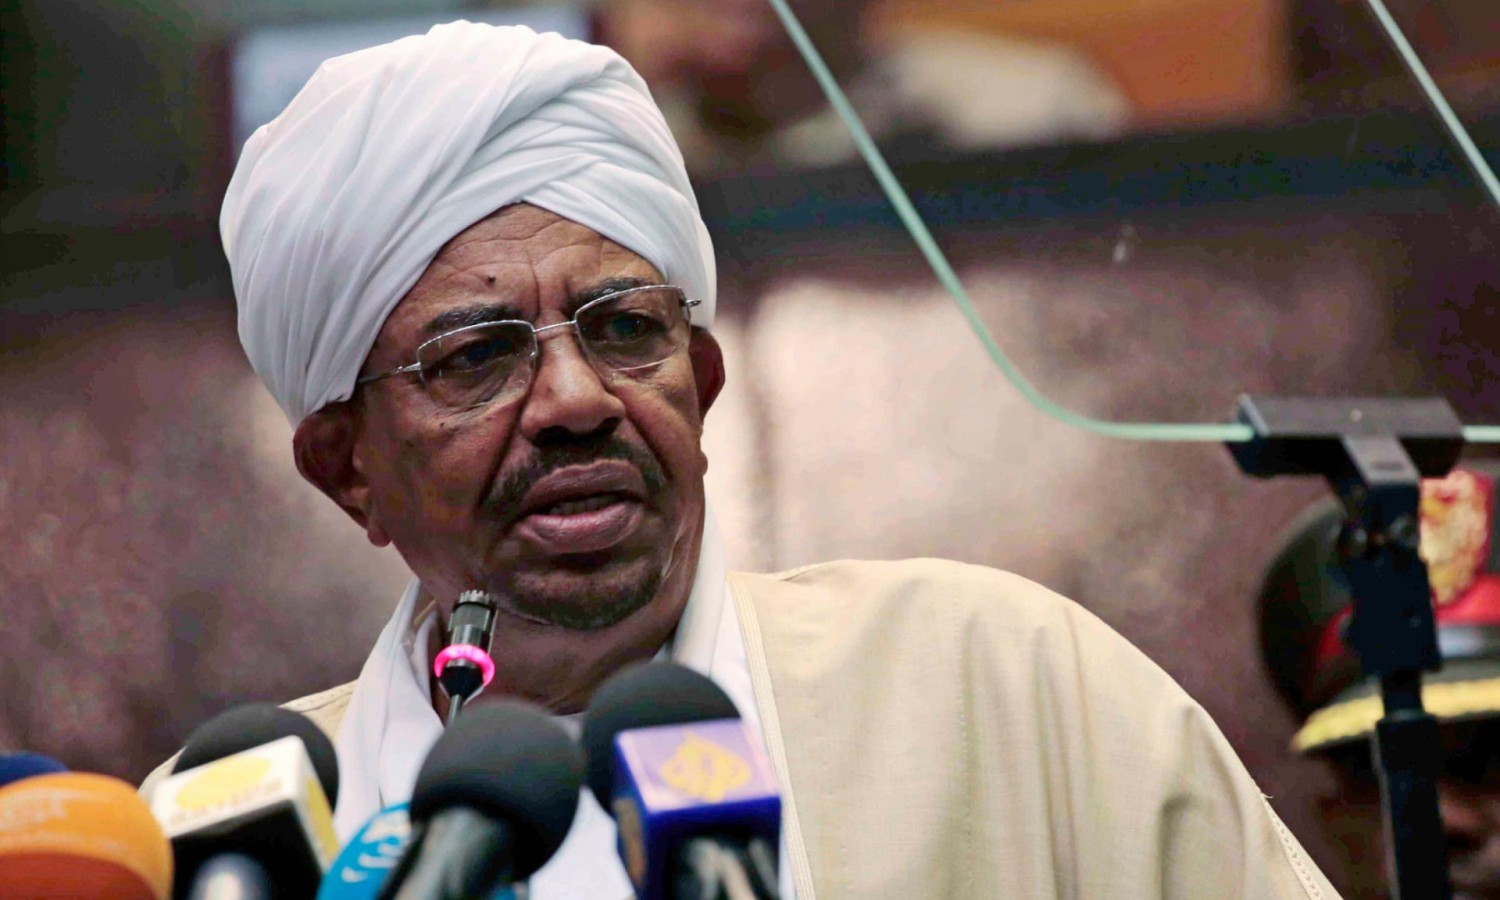 The Sudanese military seized power from president Omar al-Bashir in early April after months of protests. Photograph: Morwan Ali/EPA